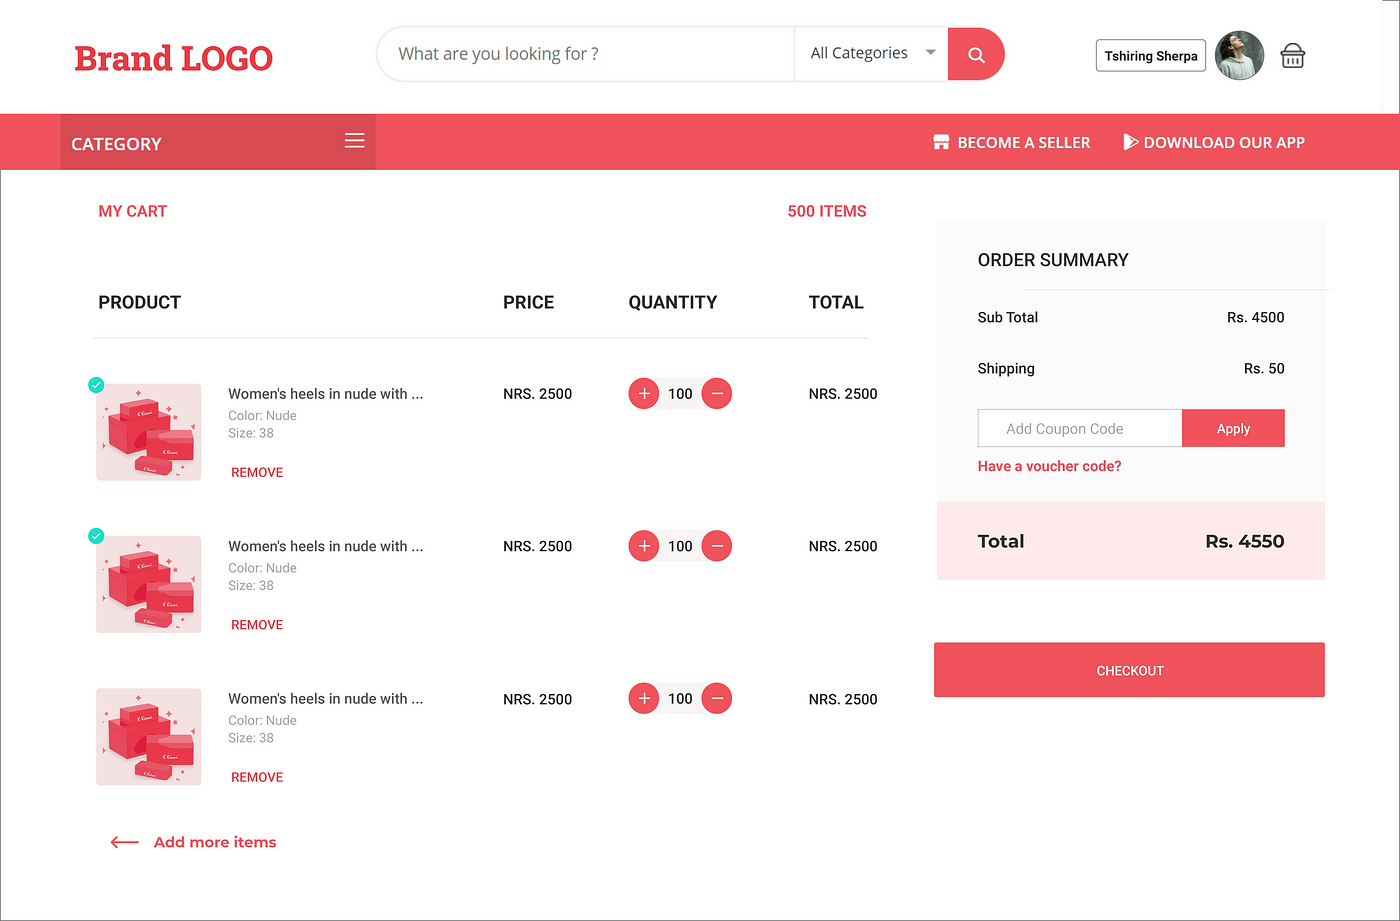 Case study: UX & UI redesign of the Checkout page for an e-commerce site, by Nikita Chaudhary